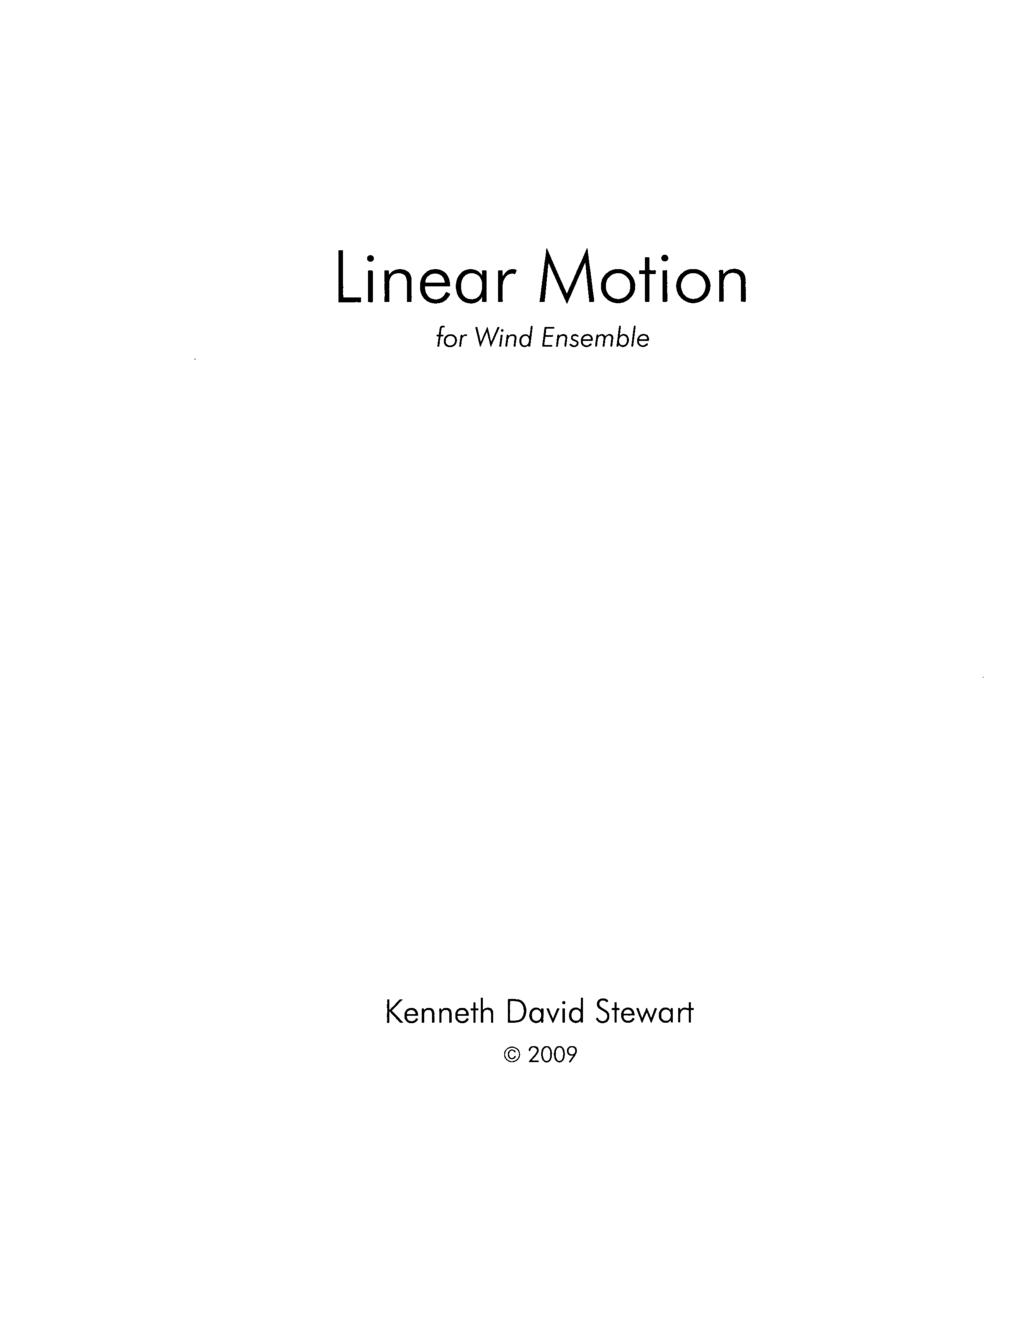 Linear Motion for Wind